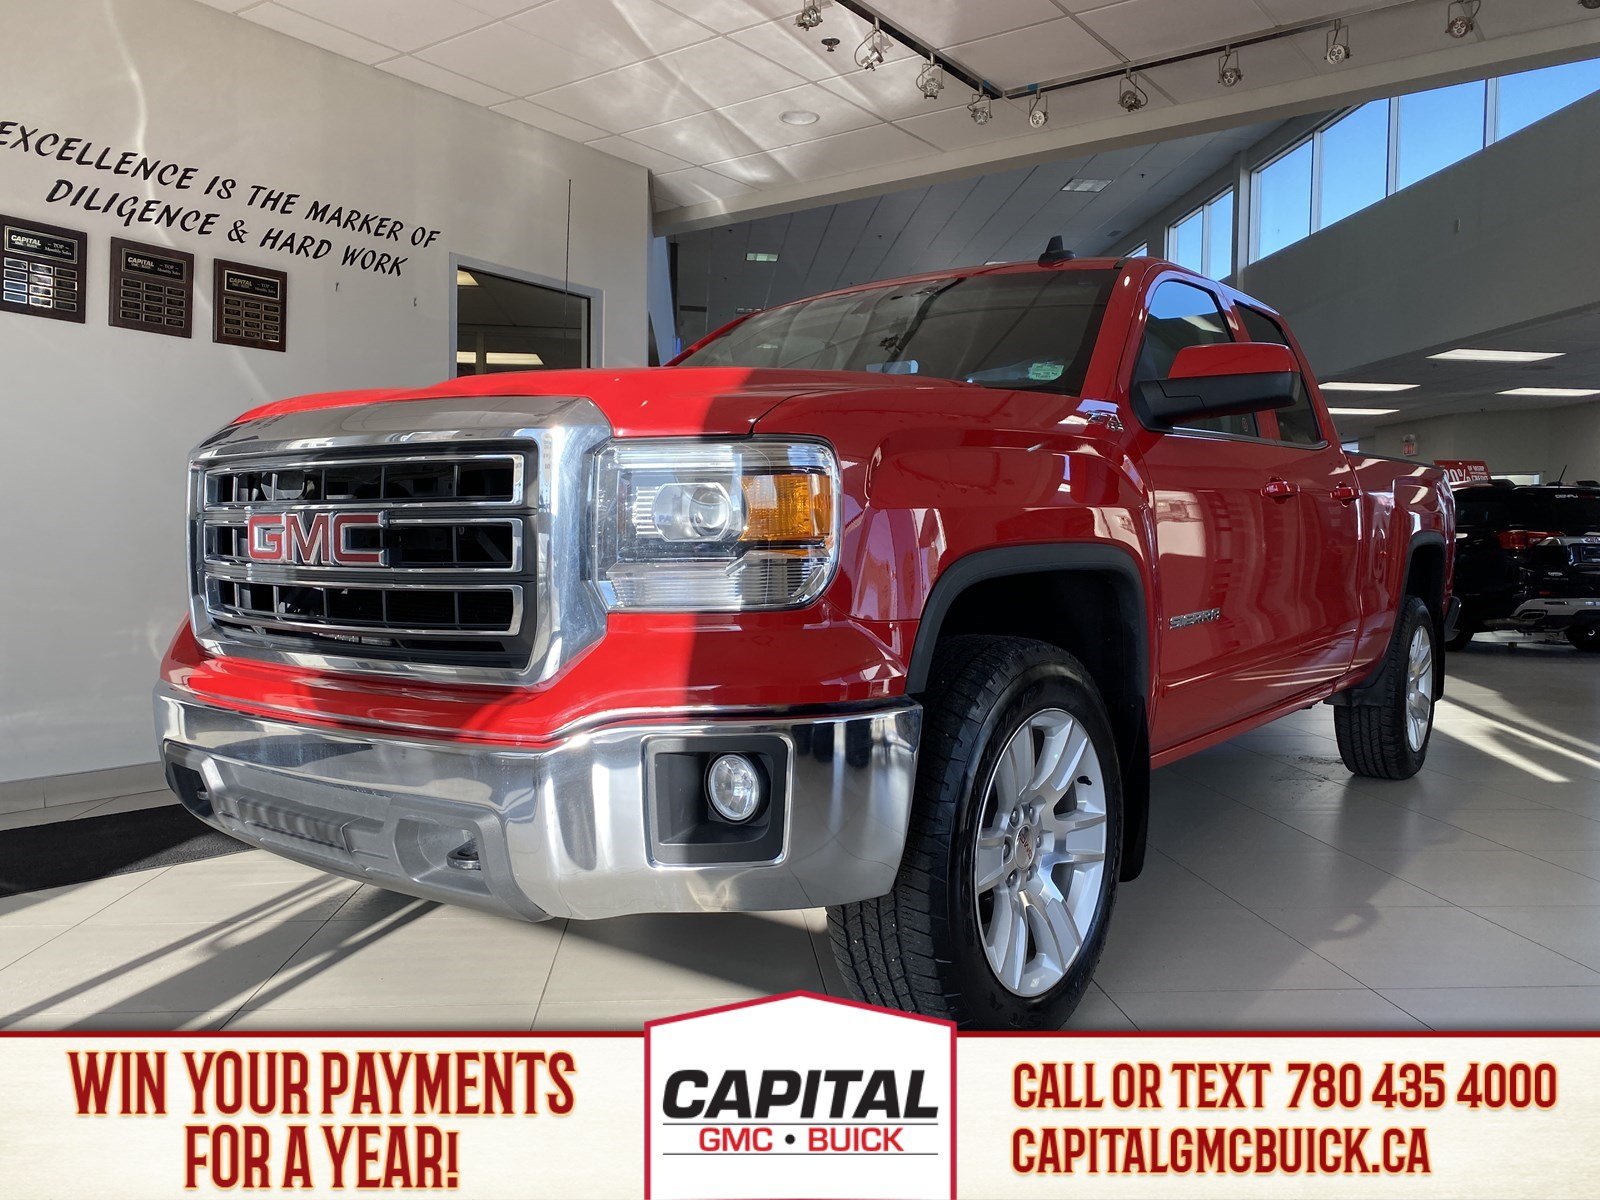 Pre Owned 2015 Gmc Sierra 1500 Double Cab Sle Heated Seats Backup Cam 67k Kms 4wd Stock 29128a